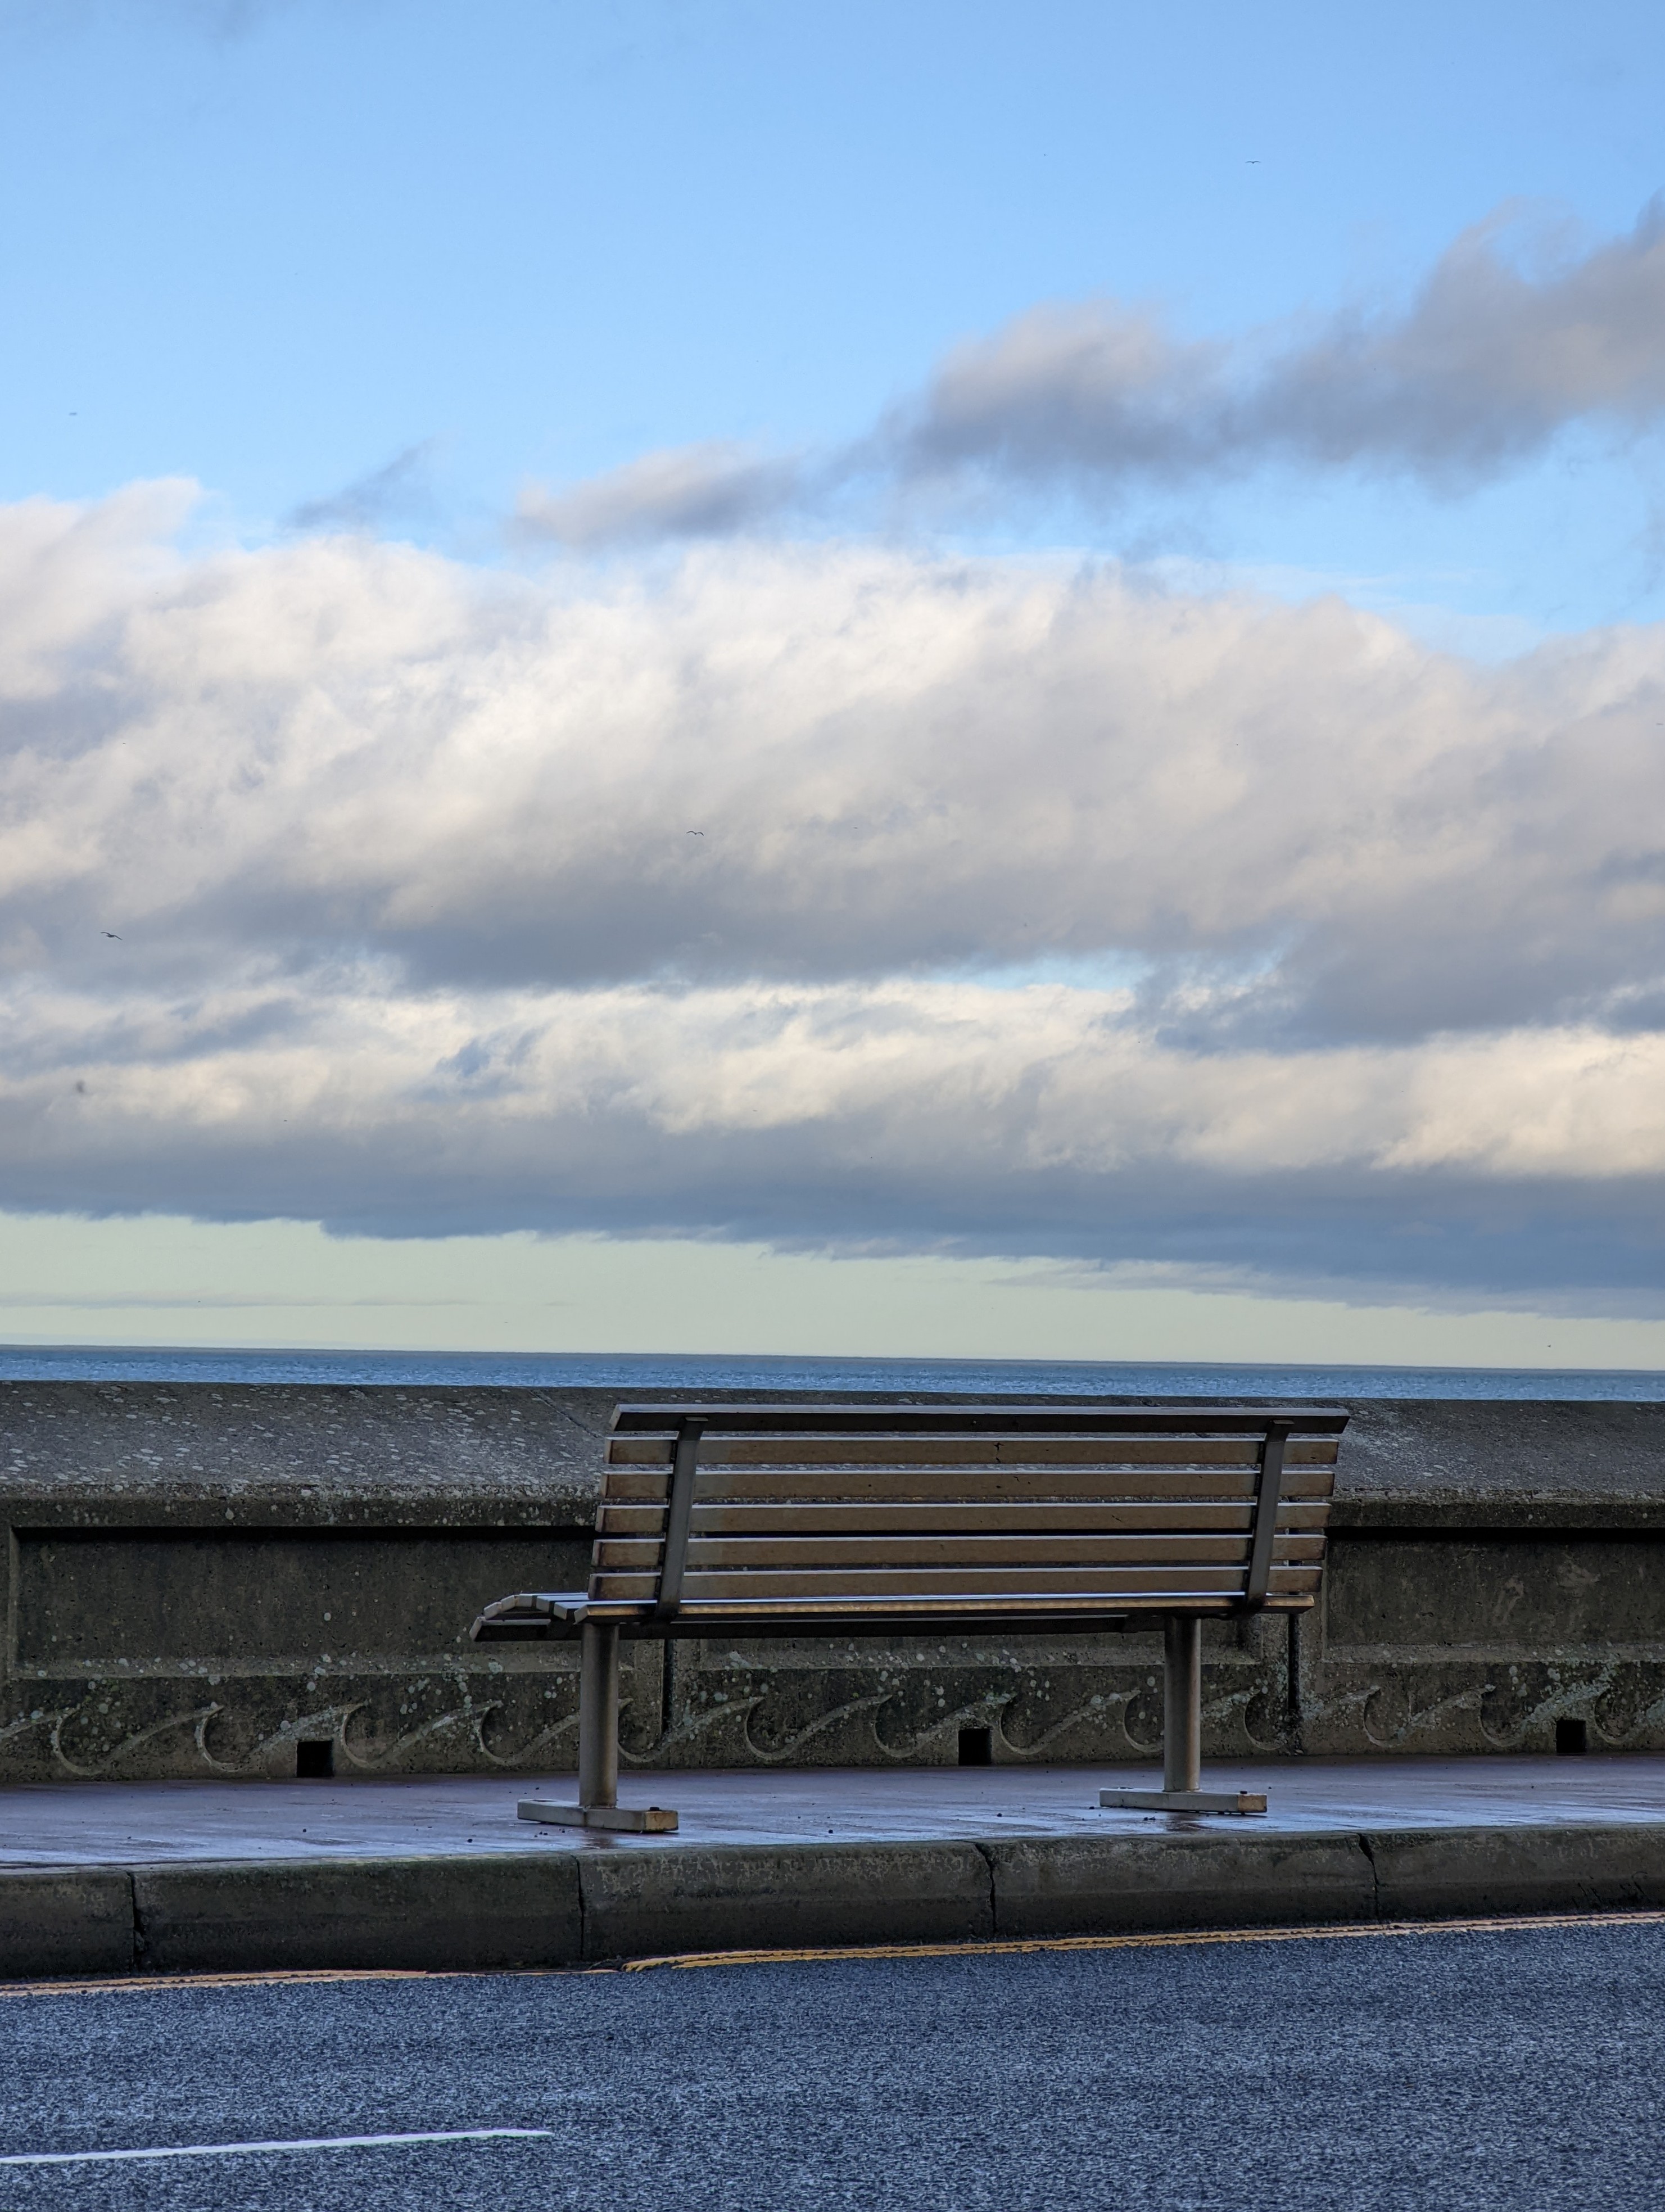 Google Pixel 6 Pro sample image of a steel bench overlooking the North Sea